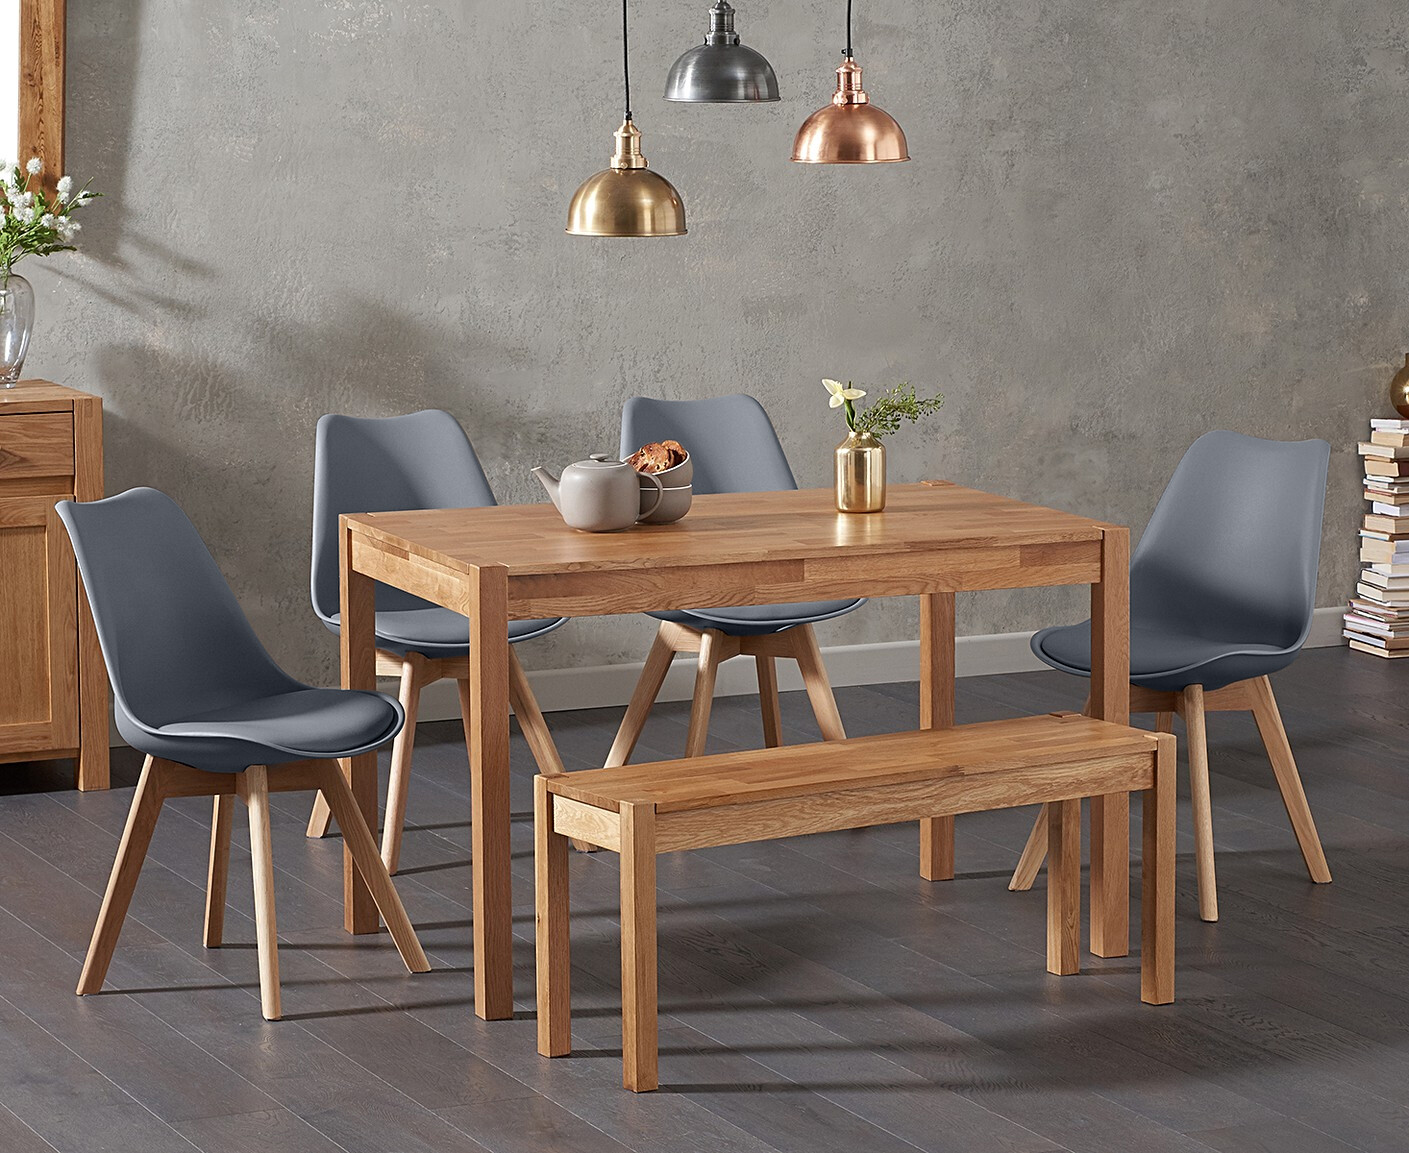 York 120cm Solid Oak Dining Table With 4 Dark Grey Orson Faux Leather Chairs And 1 York Bench